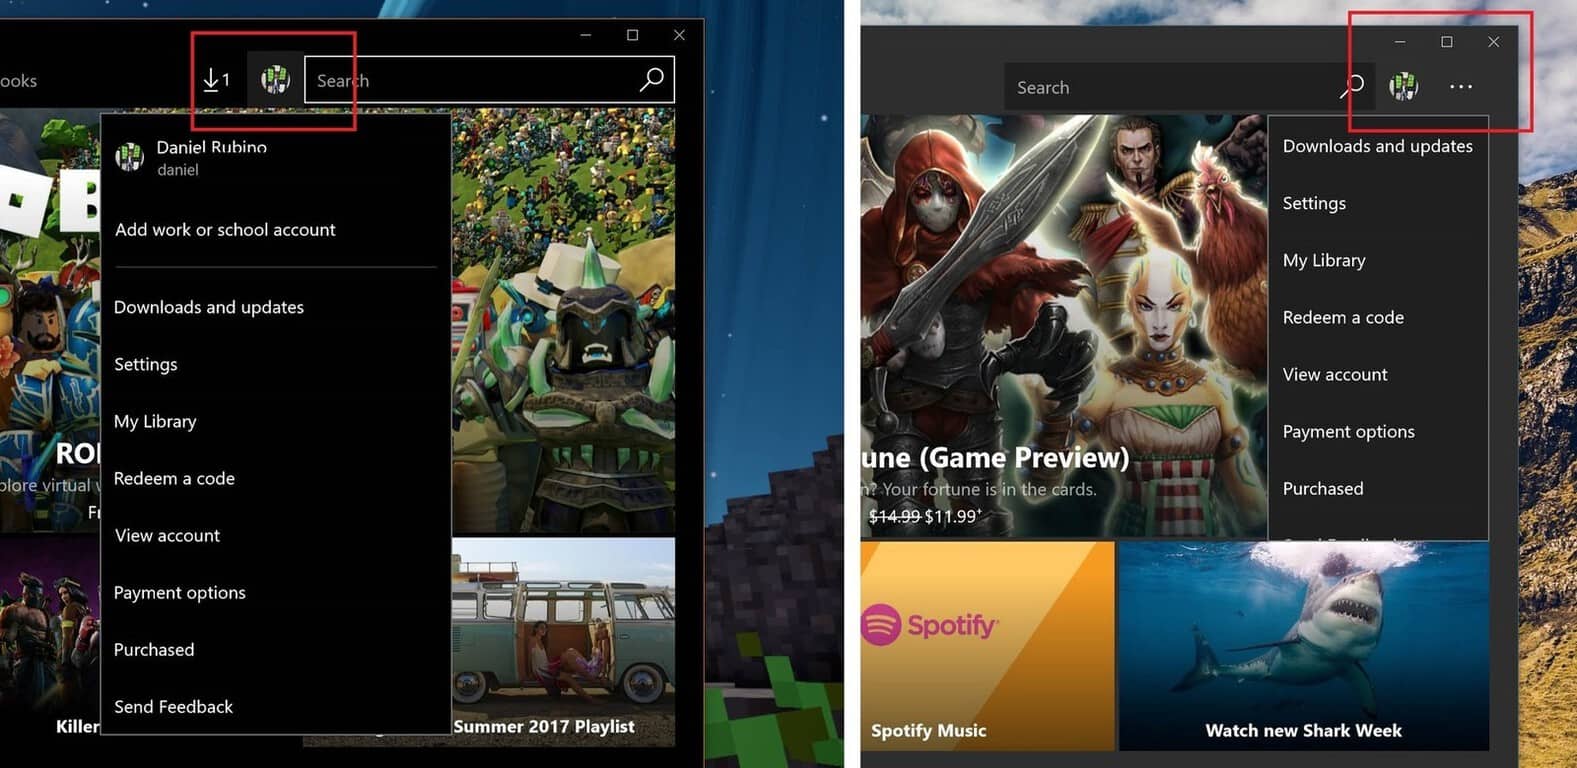 Windows Store Updated for some, brings several UI improvements to desktop and mobile - OnMSFT.com - July 26, 2017